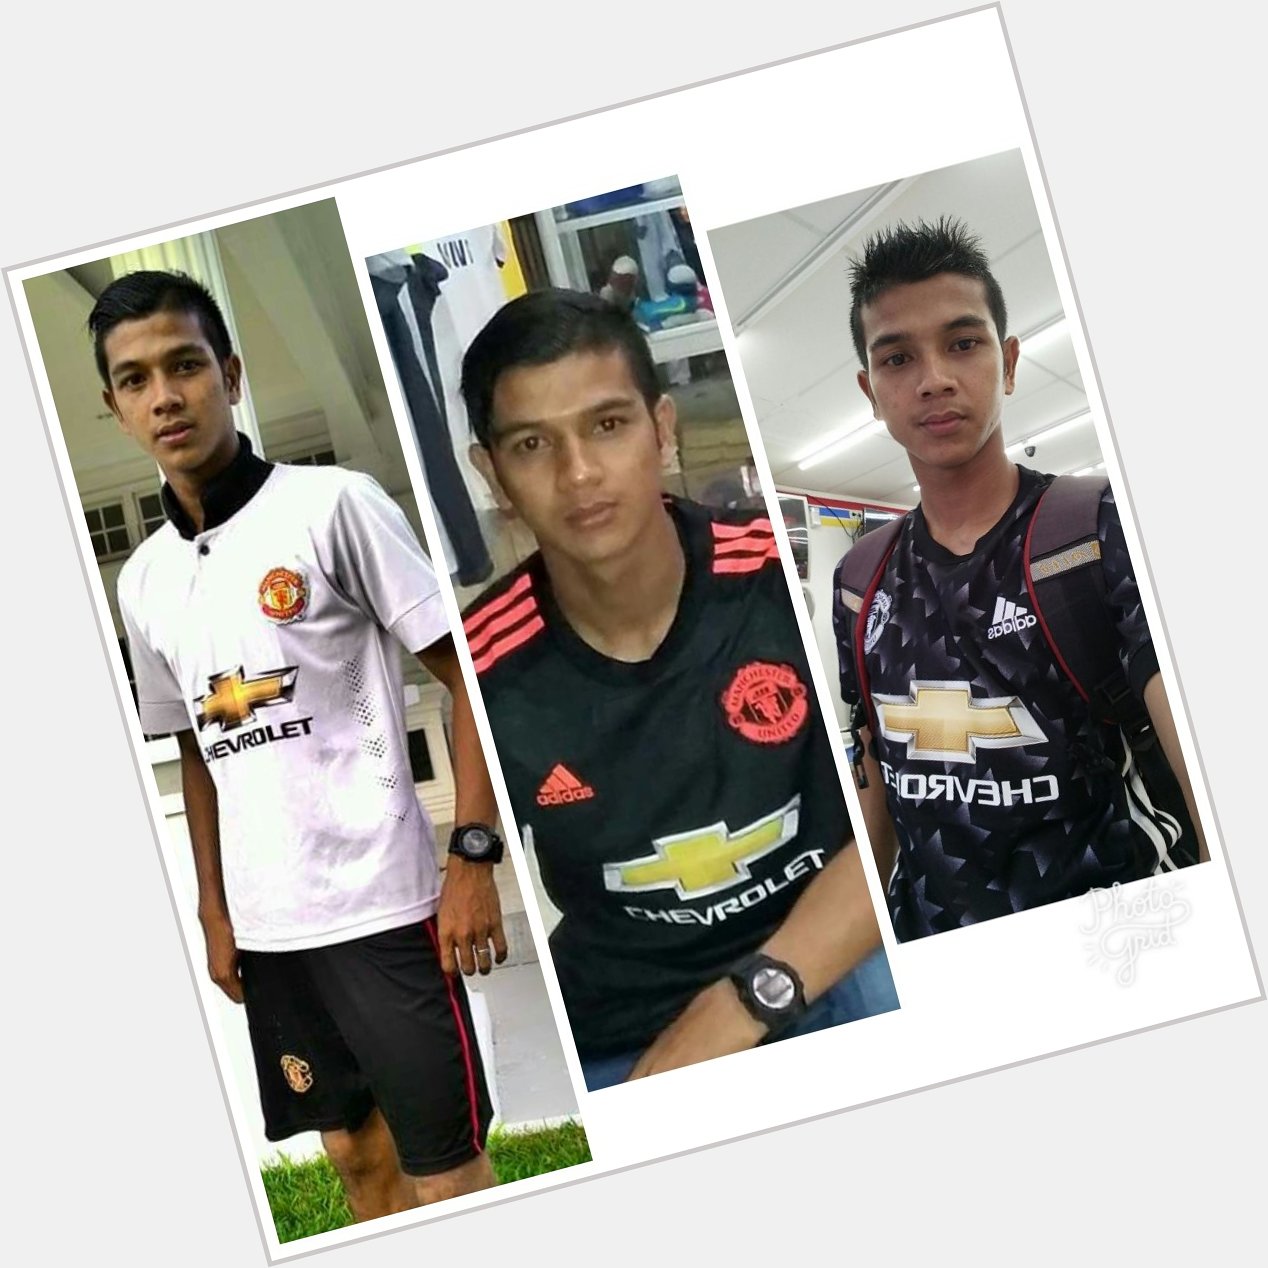   I am unitedfans from Aceh (Indonesia) Wellcome to MU Nemanja Matic and Happy birthday to you 